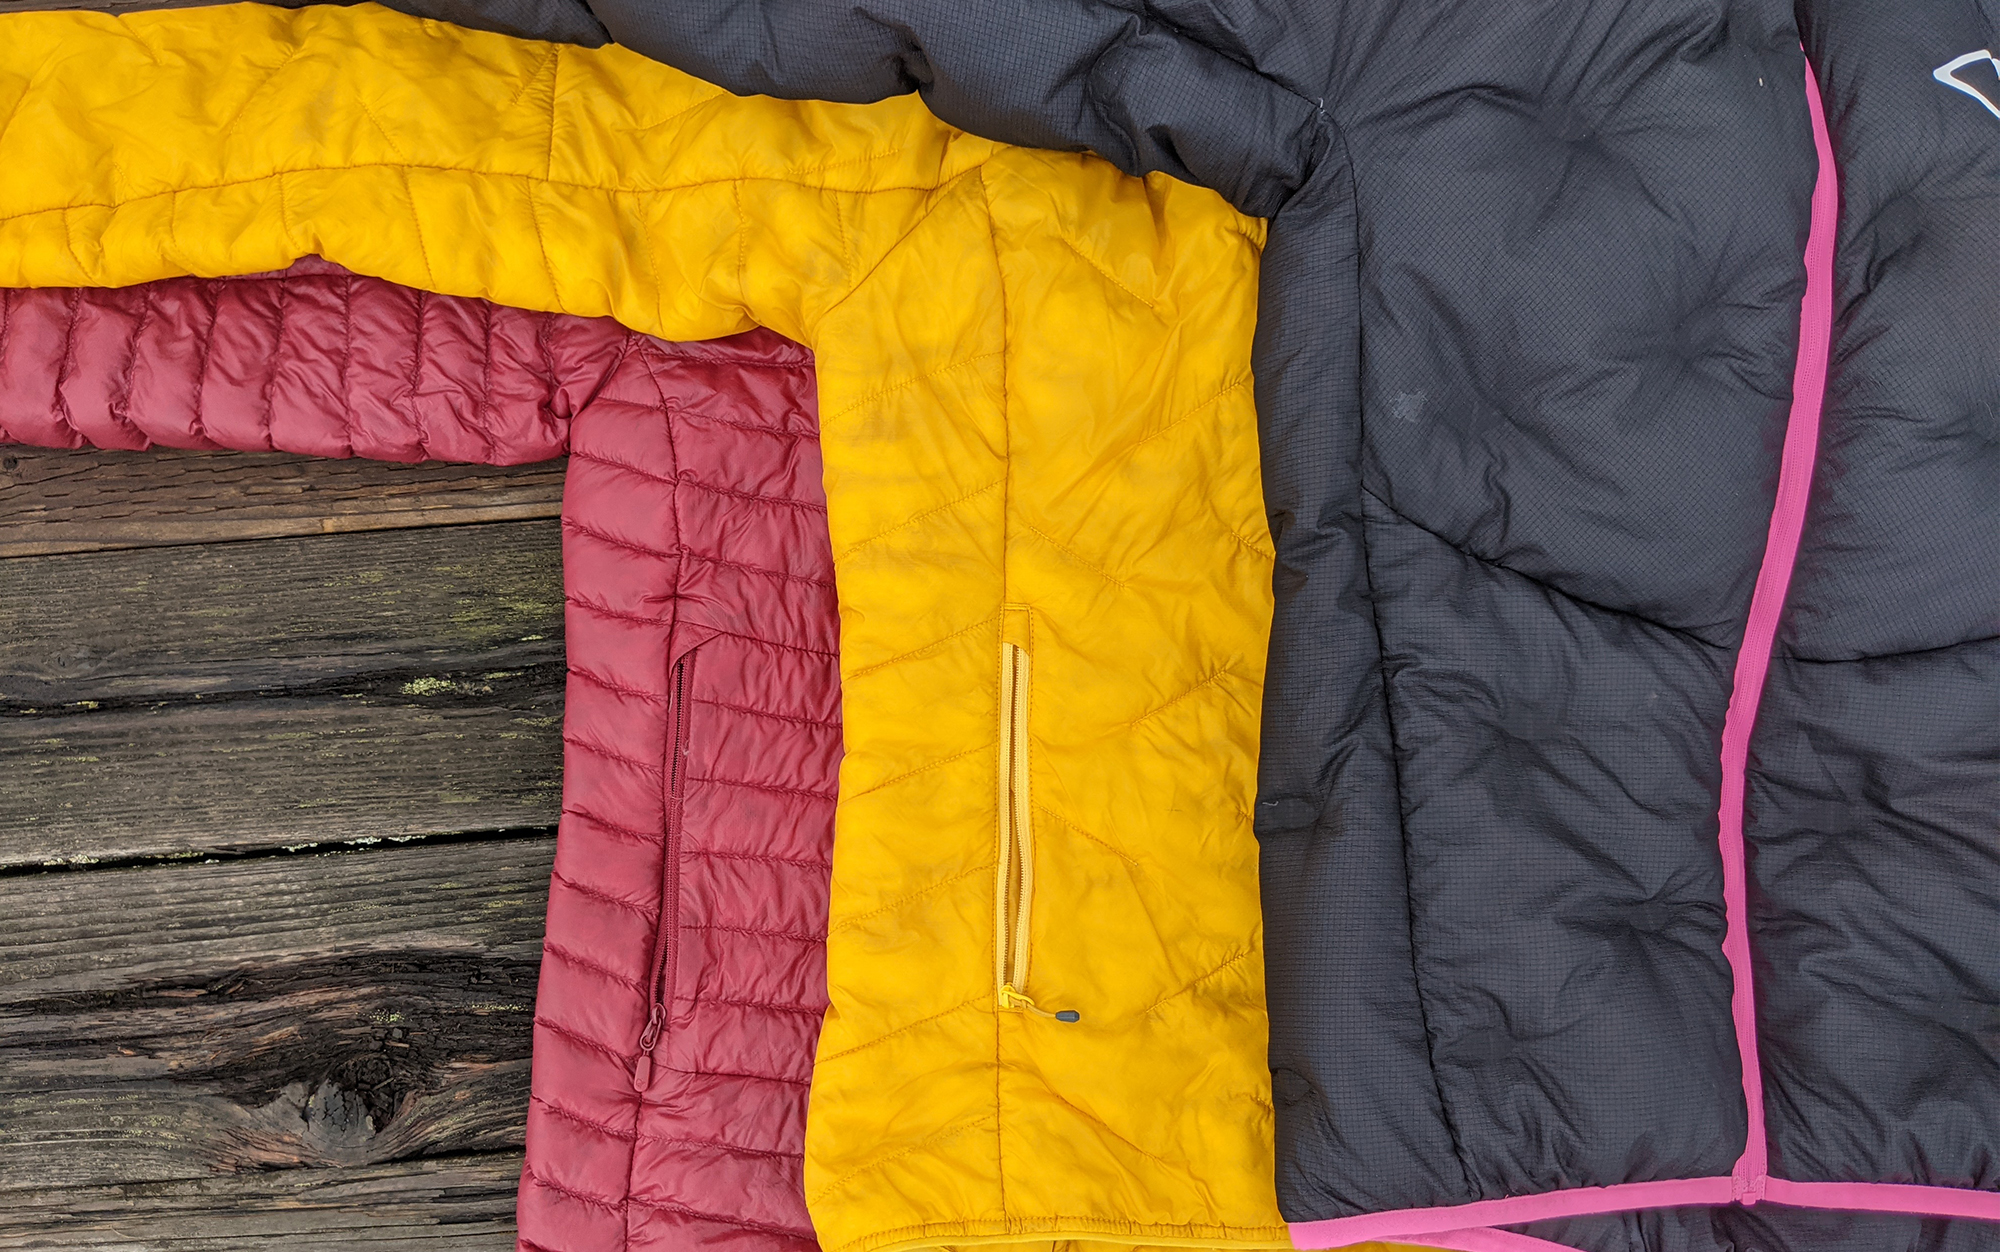 From left to right: the classic horizontal baffling of the Norrona Trollveggen, the minimal baffling of the Outdoor Research Superstrand, and the glued-in baffling of the Crazy Levity. It was also notable how naturally puffed-out the 1000fp of the Crazy Levity was next to the best-in-class synthetics of the Superstrand and the 850fp of the Trollveggen.